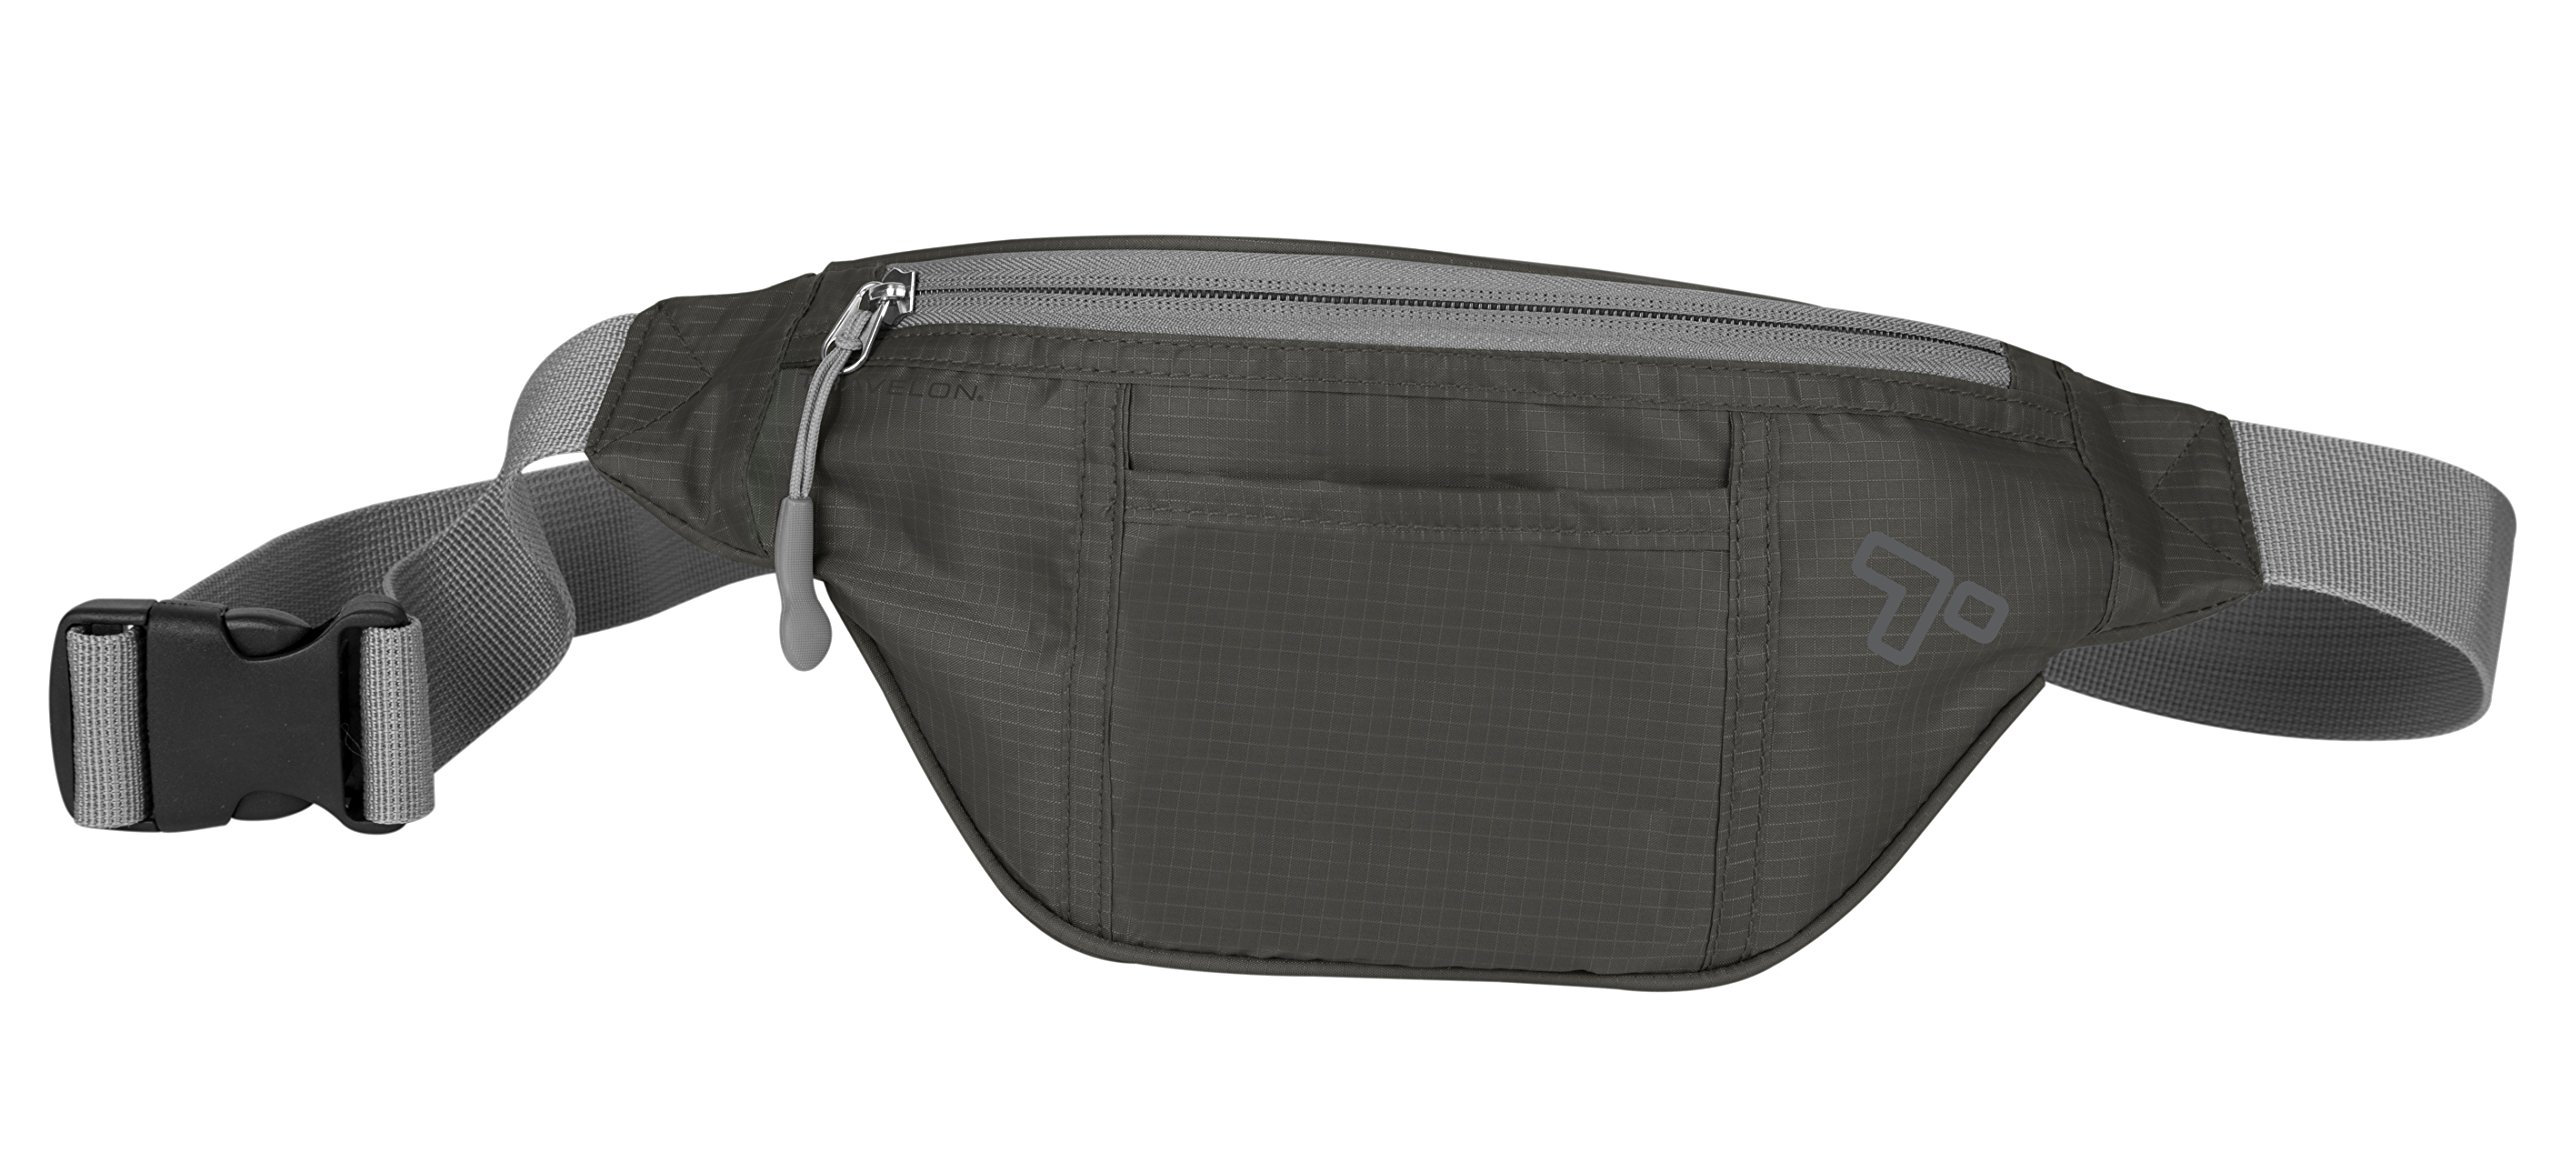 Travelon Top Zip Waist Pack, Charcoal, One Size